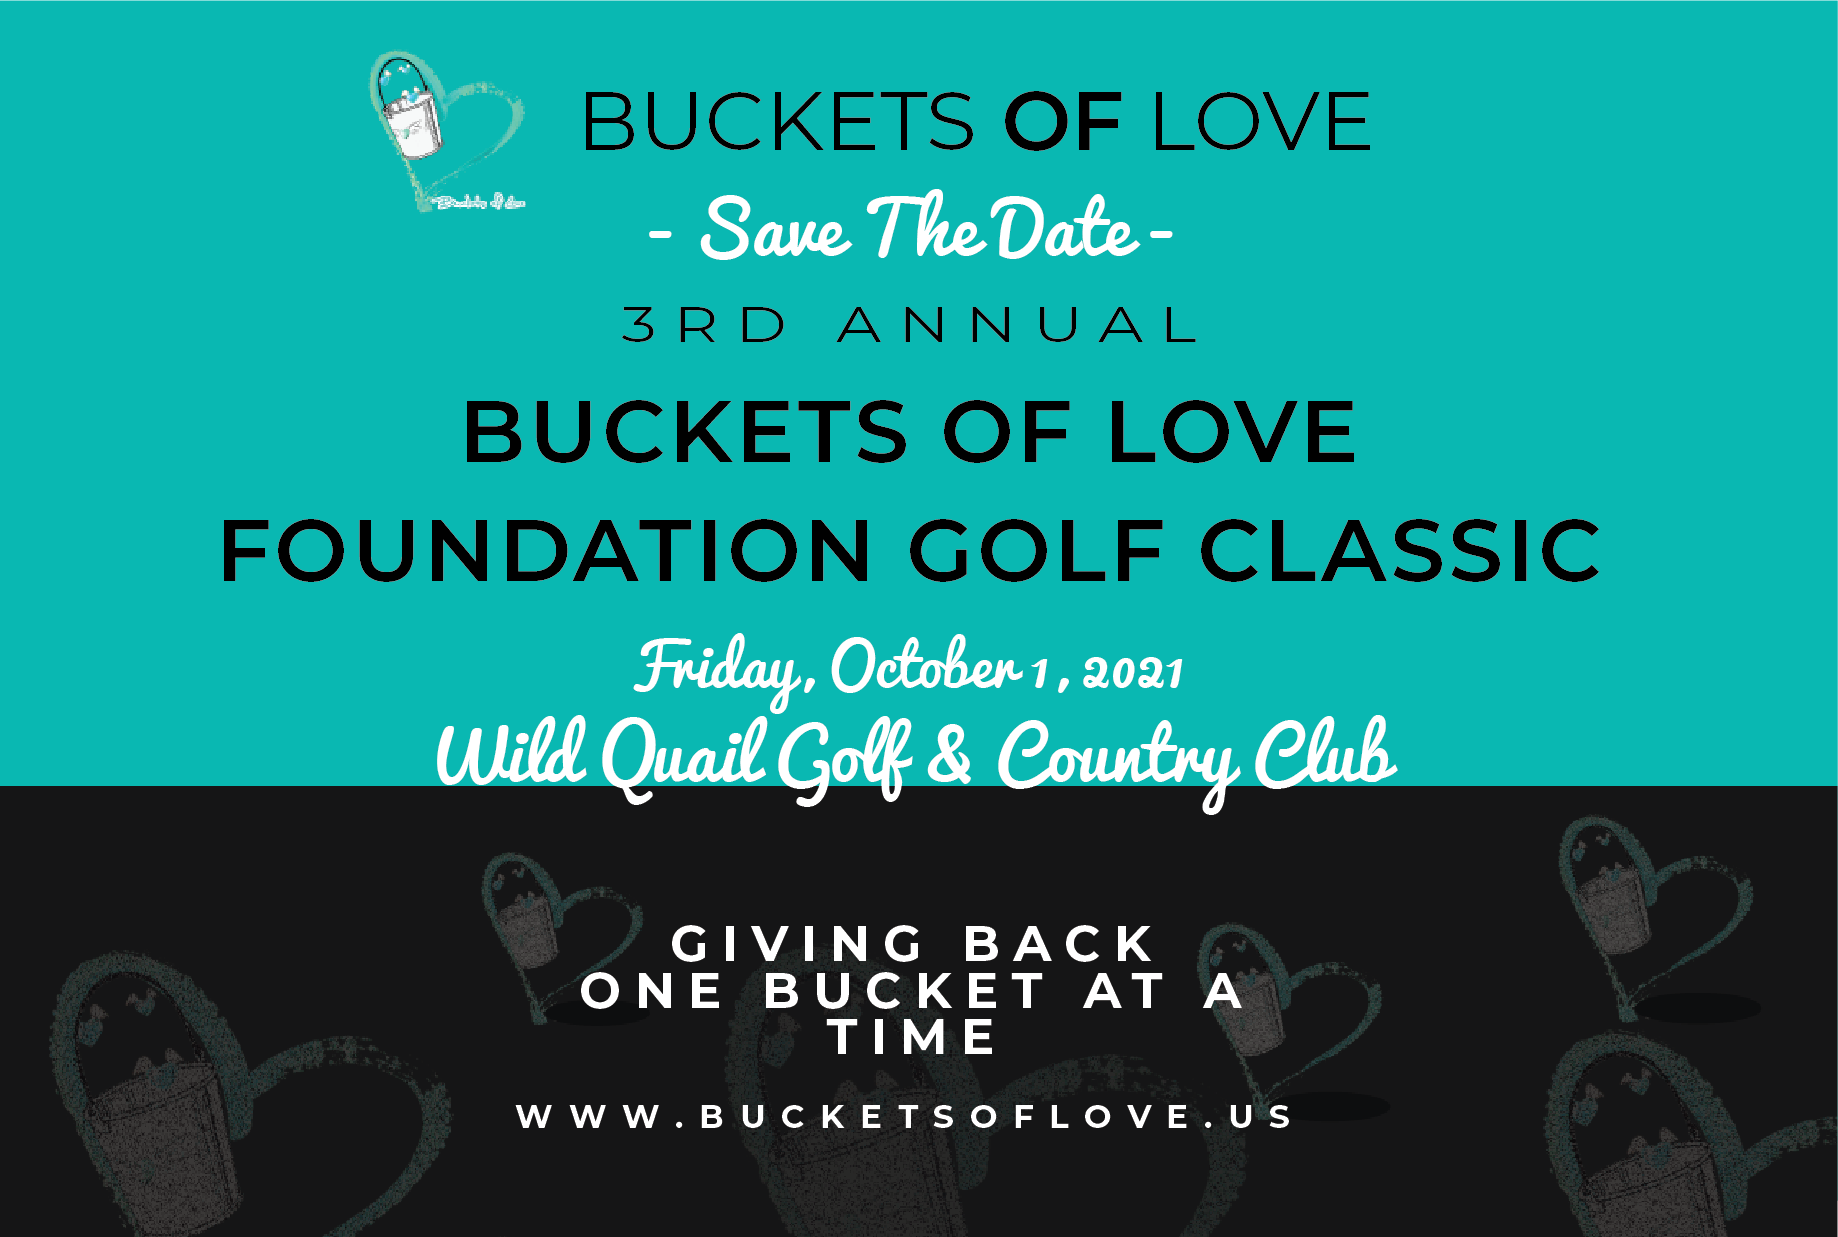 3rd Annual Buckets of Love Foundation Golf Classic